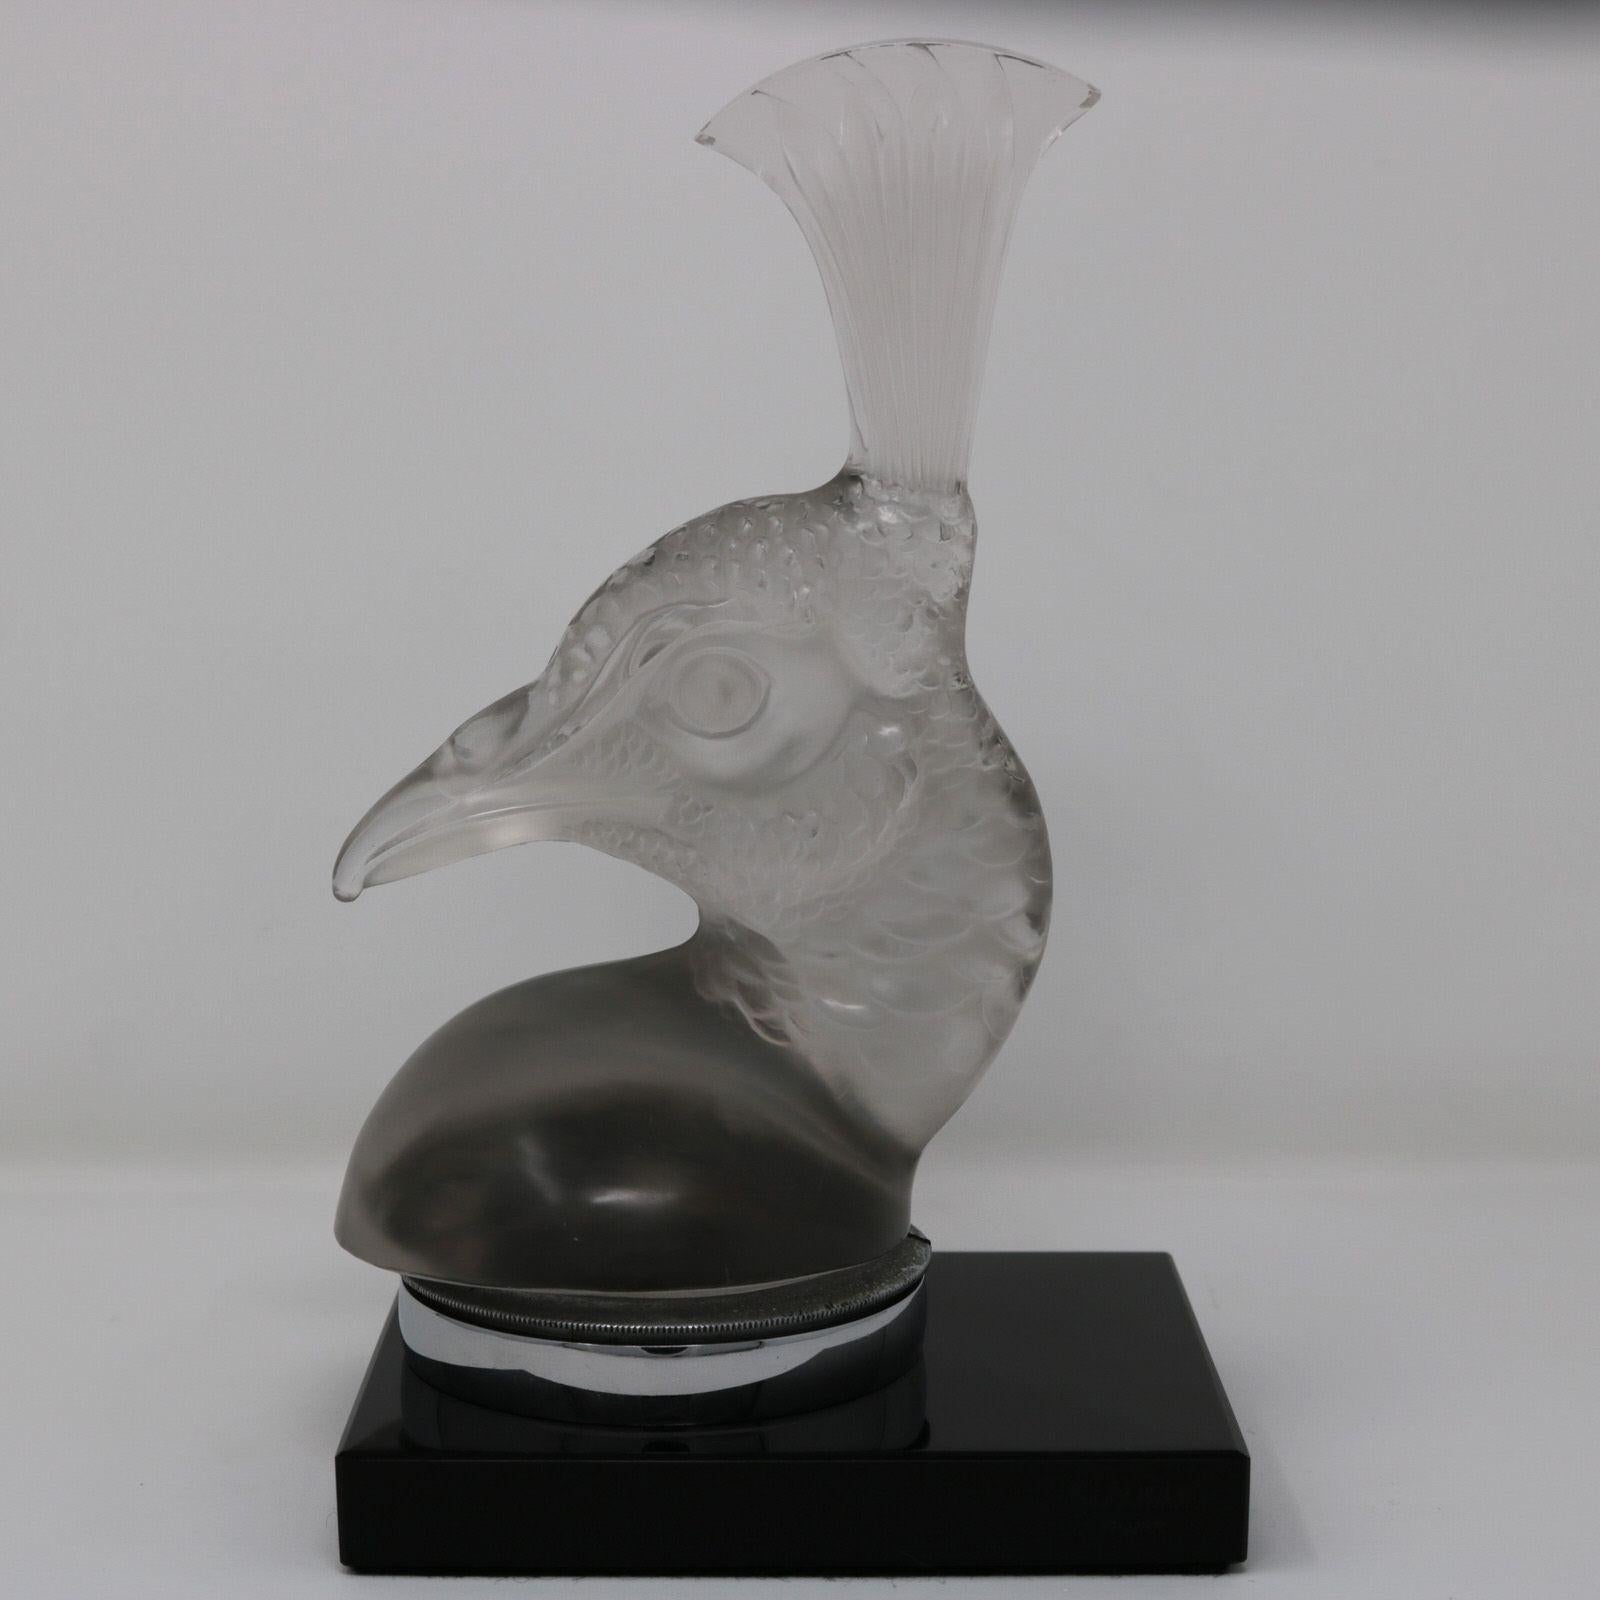 Rene Lalique clear & frosted glass 'Tete De Paon' car mascot. This model features the head of a peacock. The bird is mounted onto a rectangular, black glass base. Moulded maker's mark to the edge of the base, 'R LALIQUE. Stenciled makers mark for